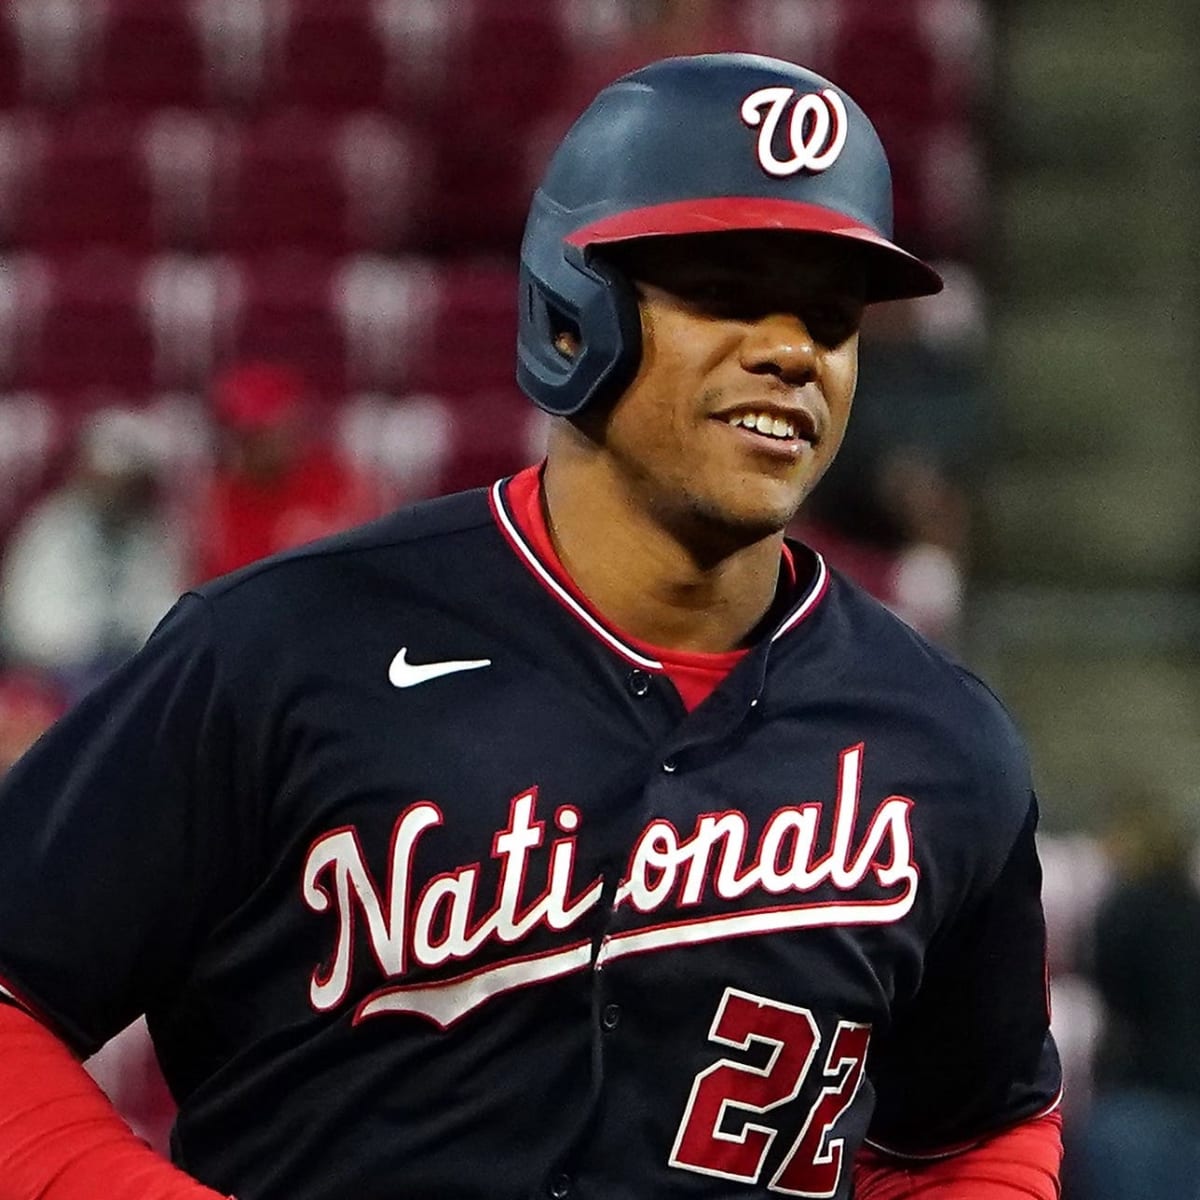 Washington Nationals - 500 hits in the career of Juan Soto.